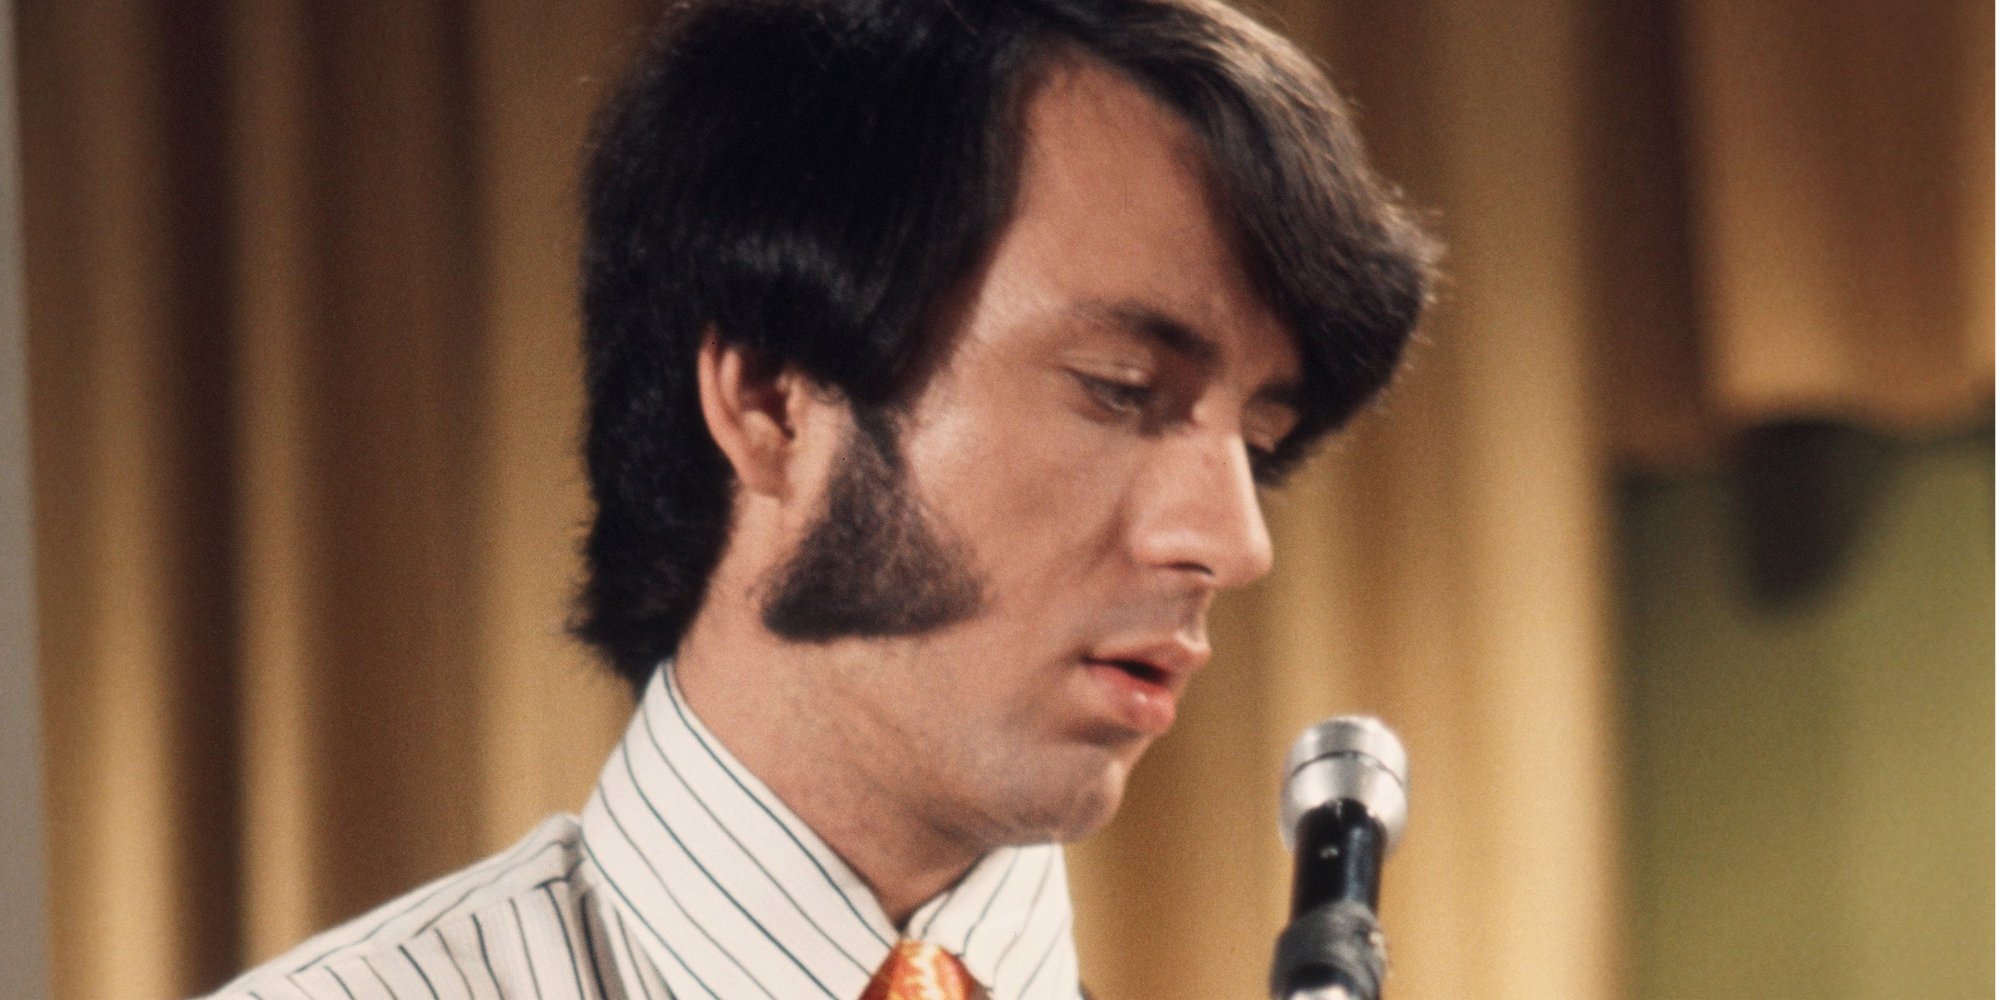 Mike Nesmith on the set of 'The Monkees' television series.